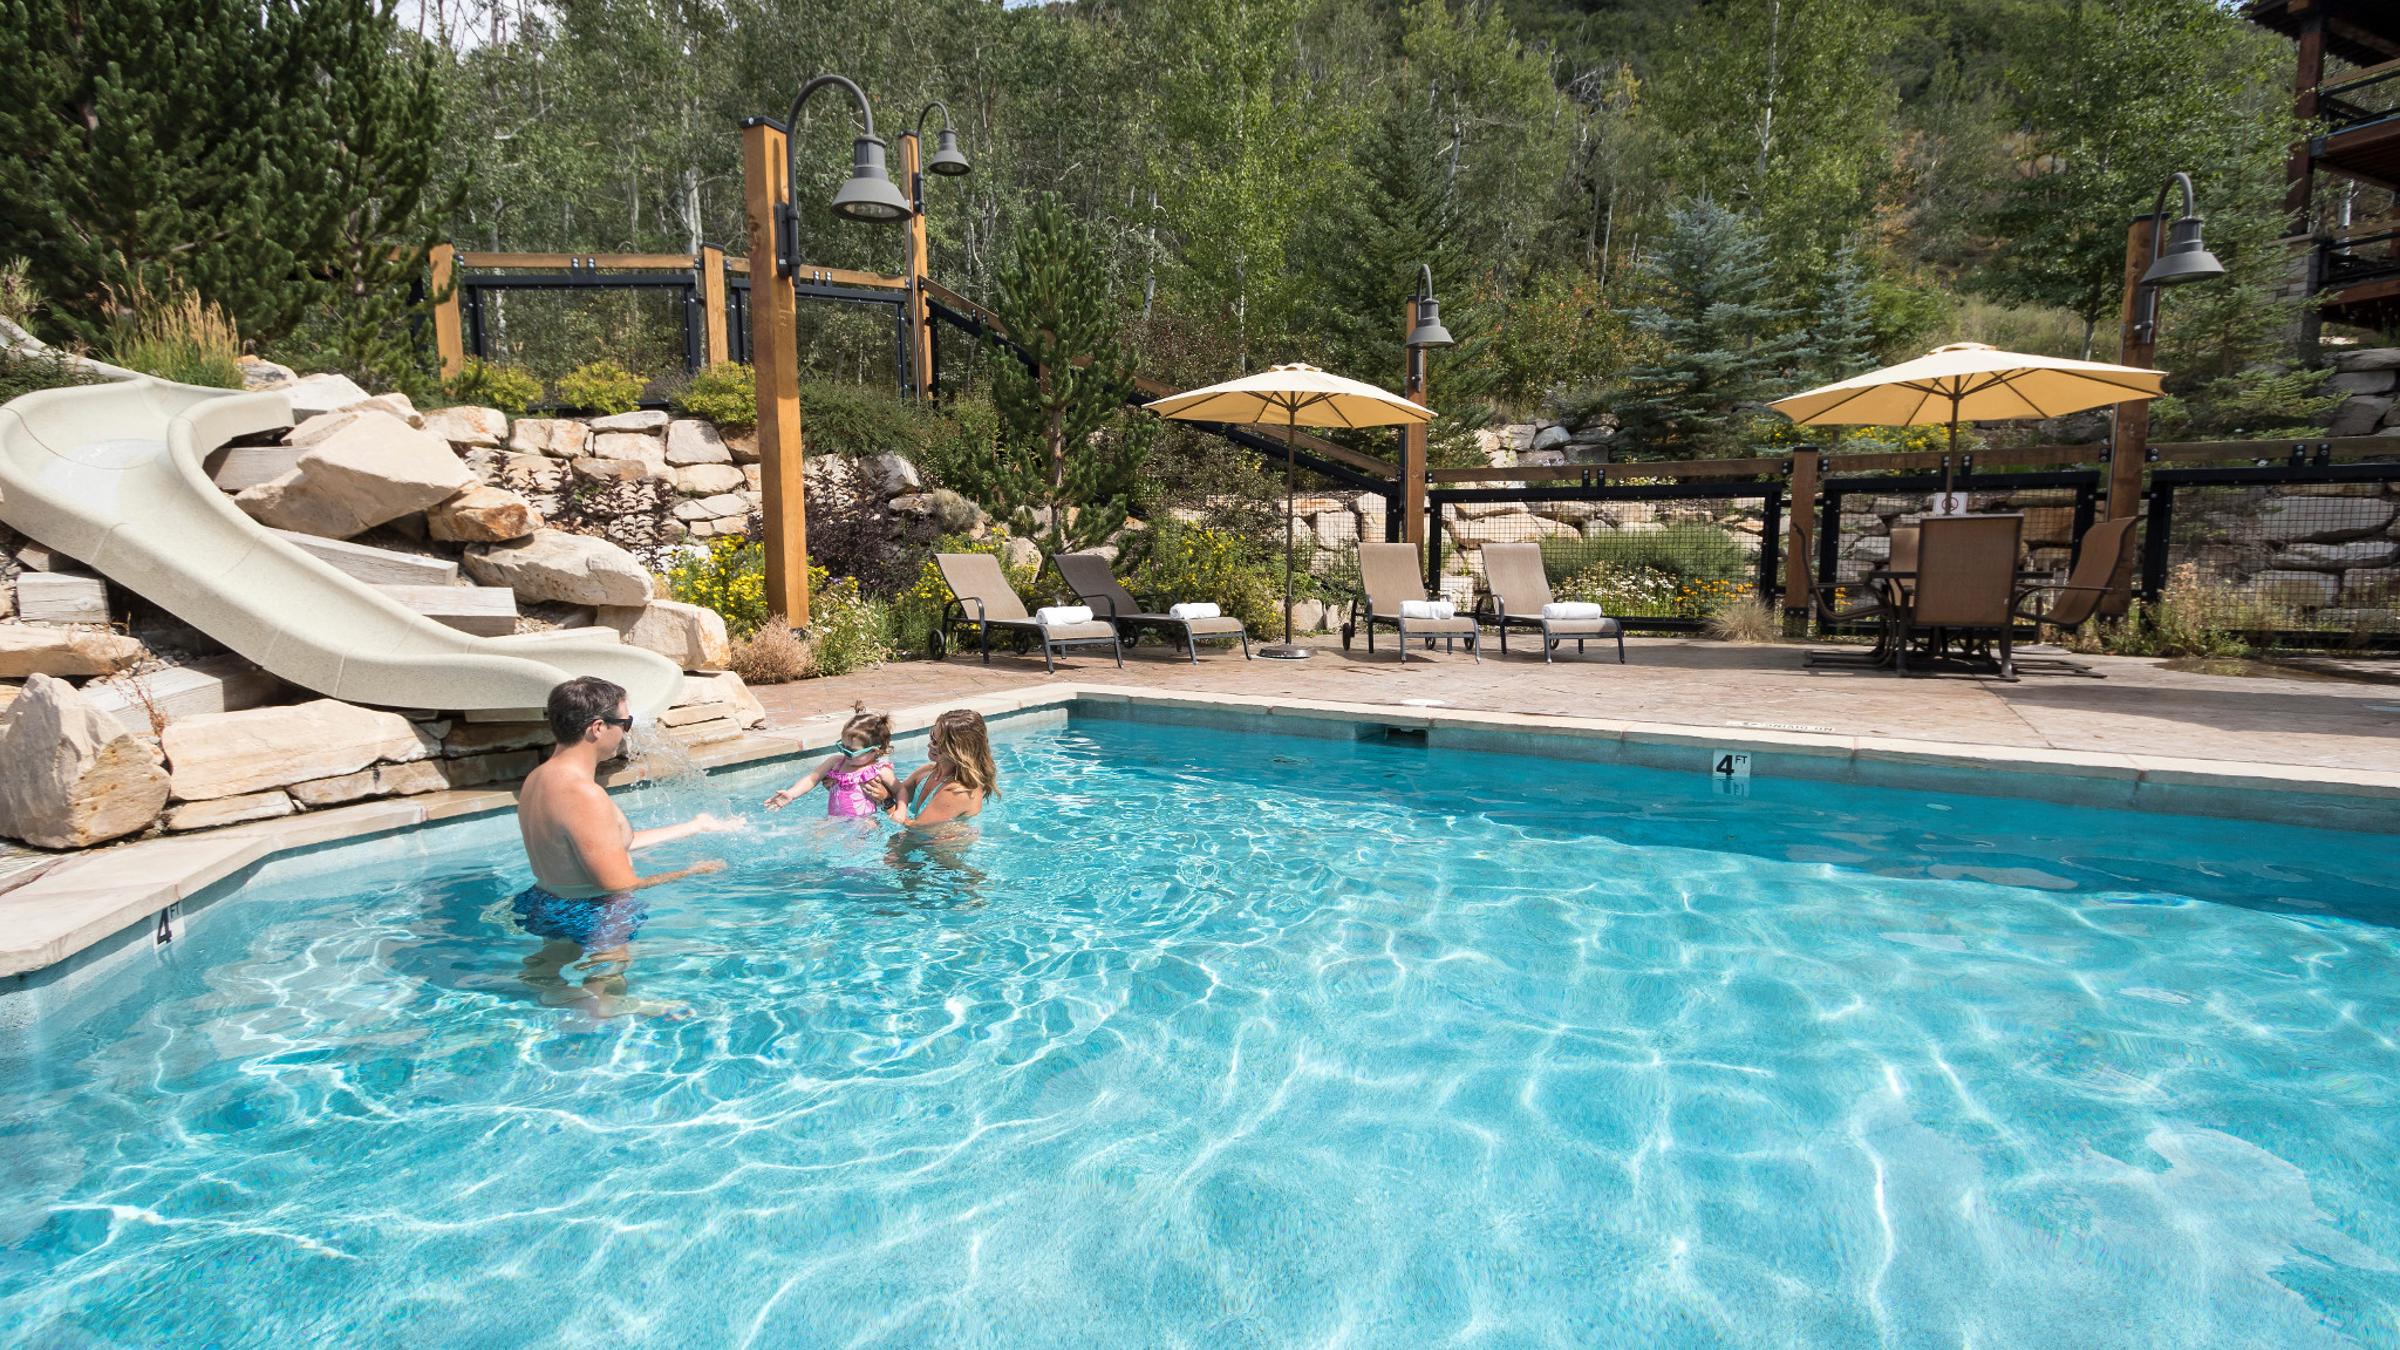 A family in the pool at Silver Baron Lodge